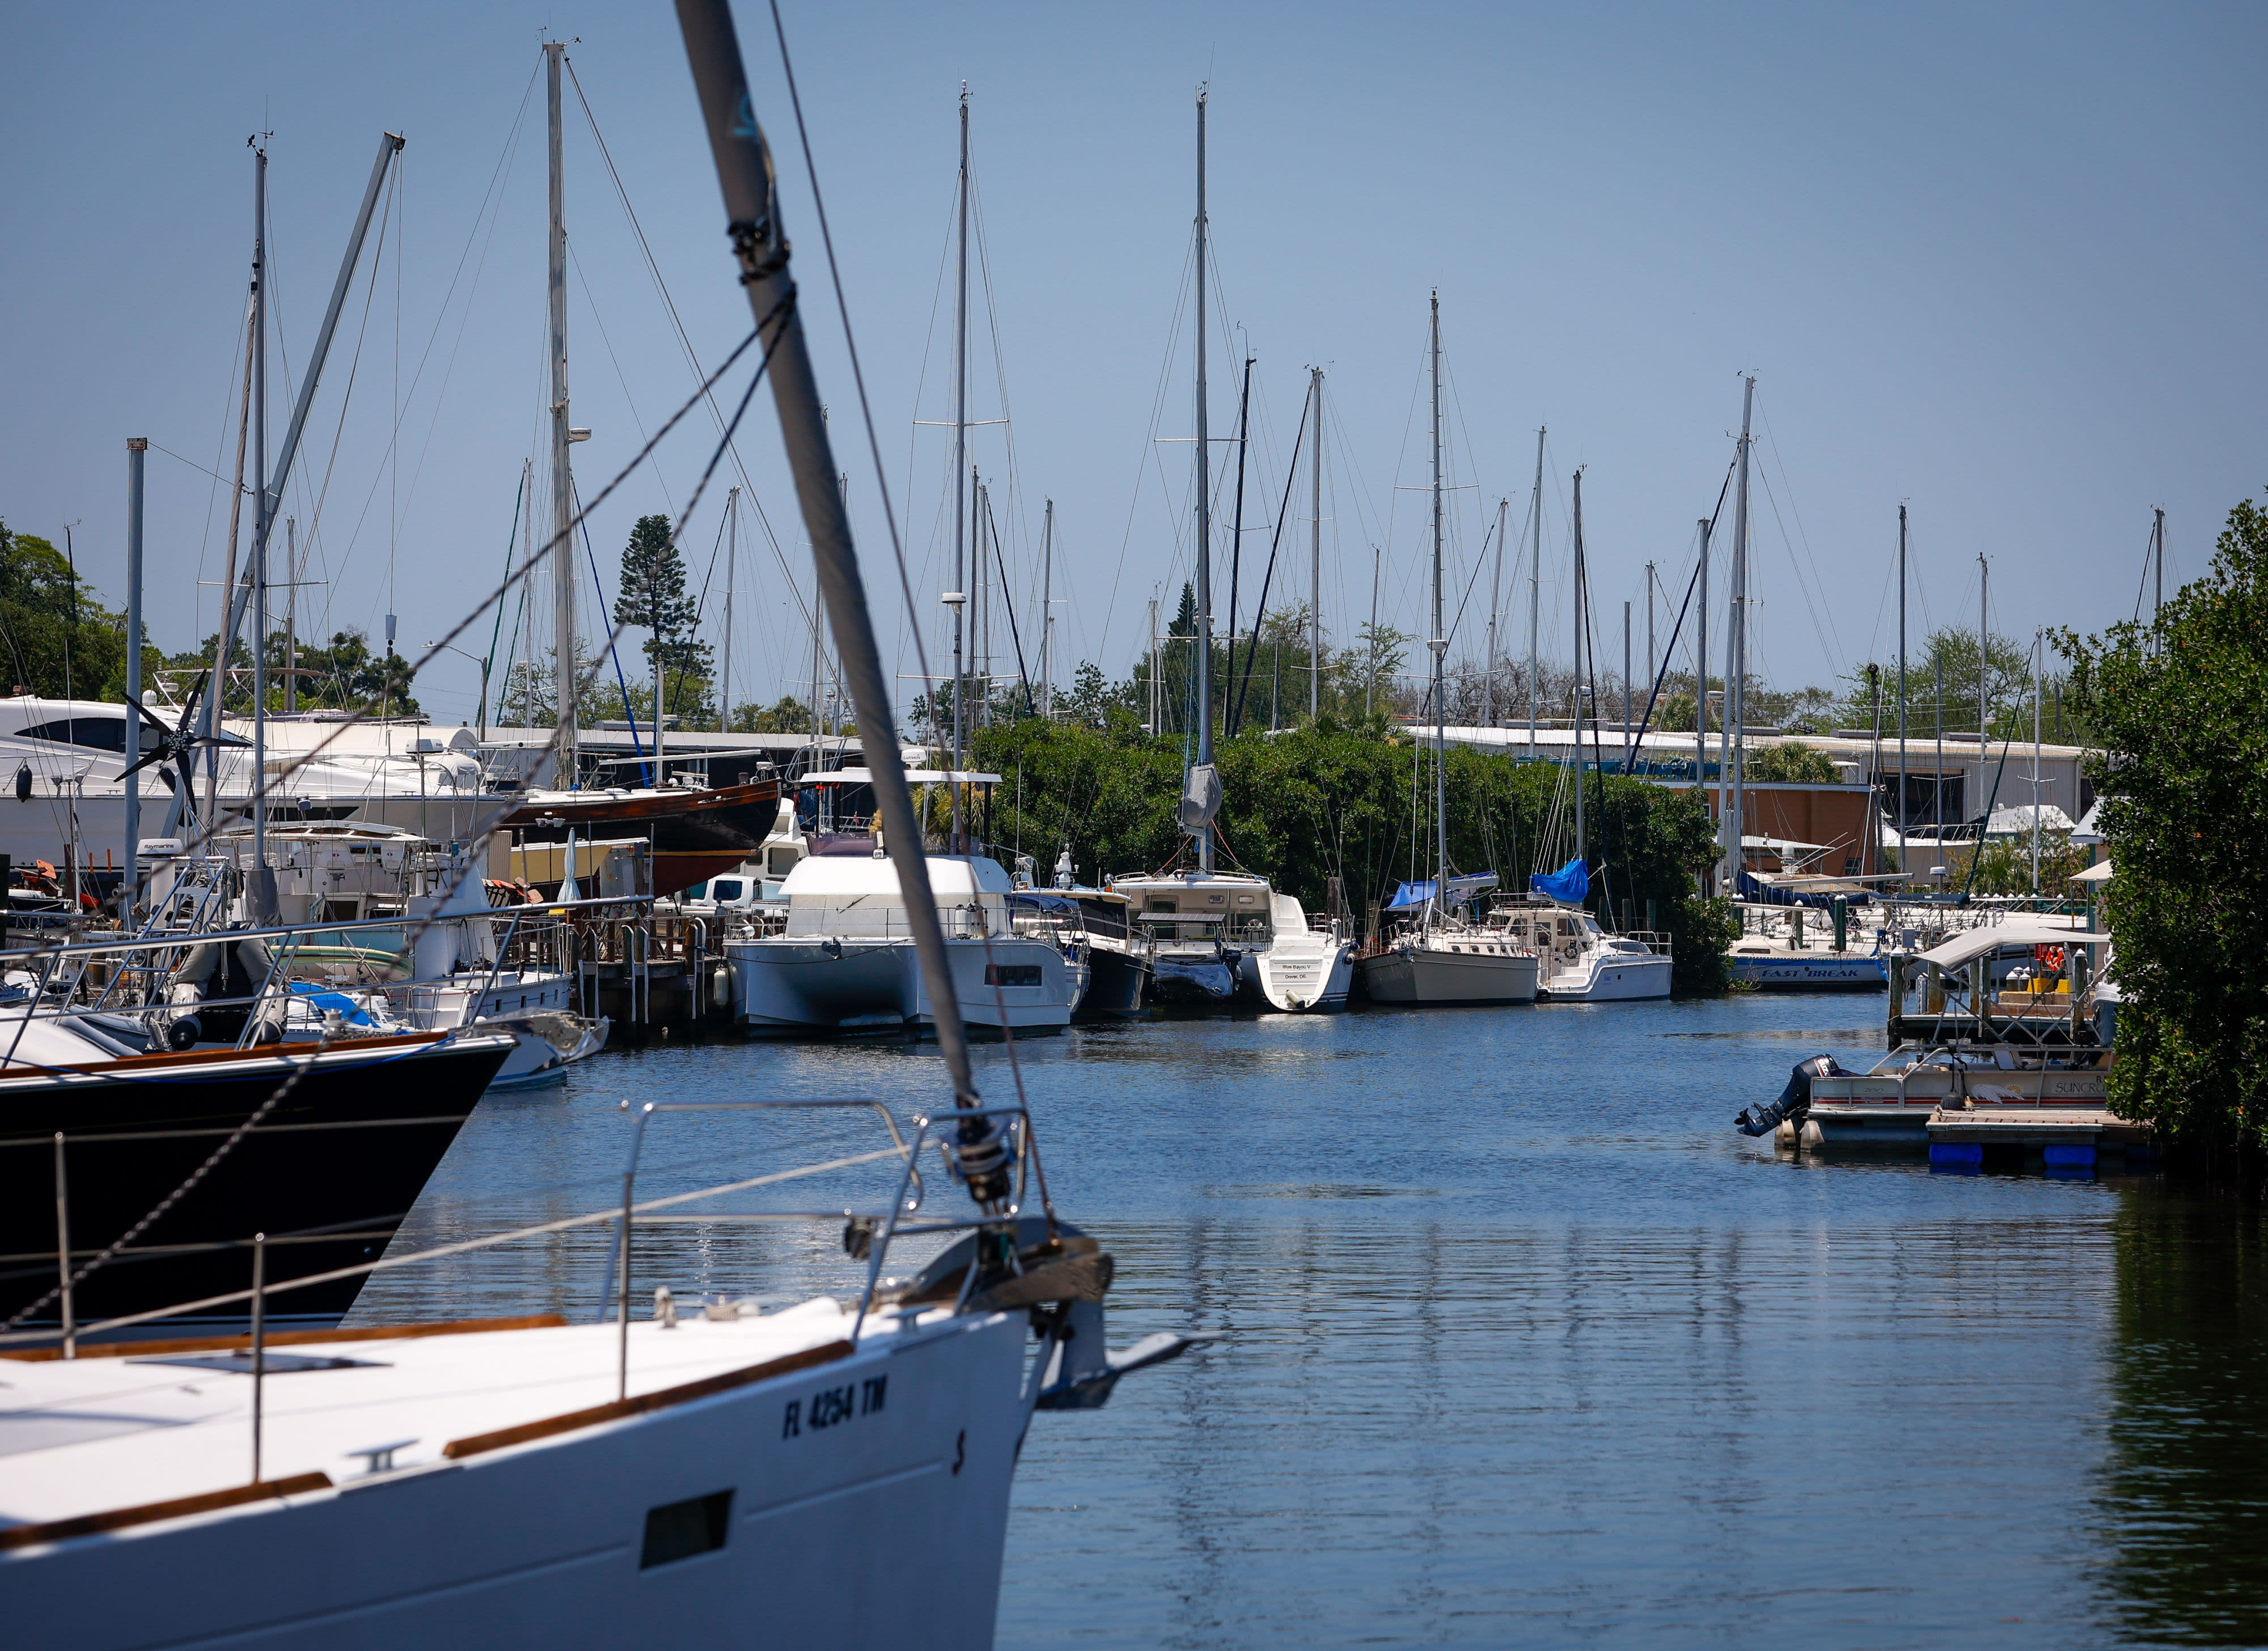 Who is buying up St. Petersburg’s Salt Creek boatyards, and why?